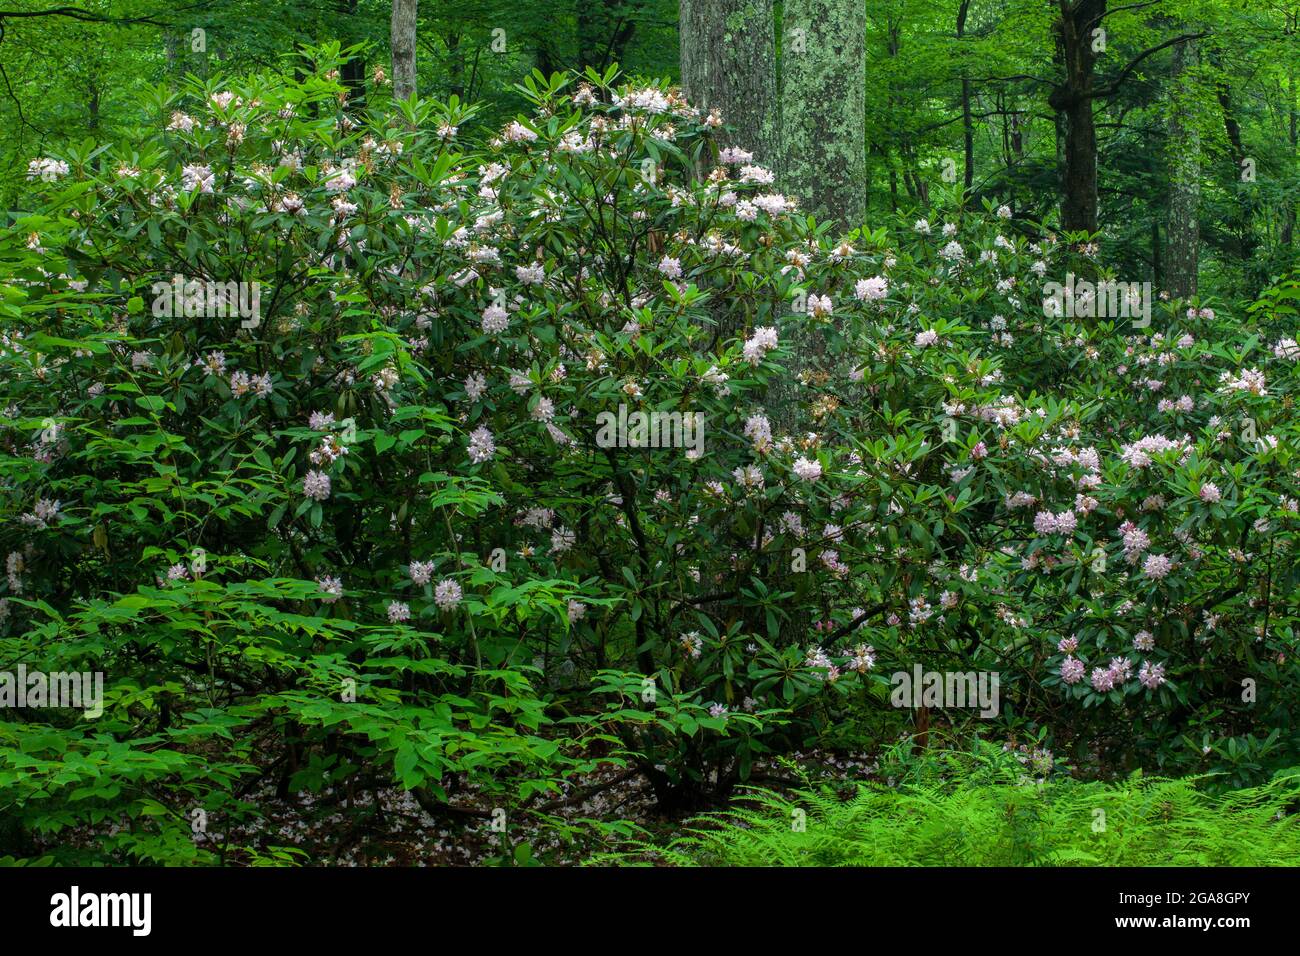 Rhododendron, Rhododendron maximum, also known as Great Laurel and Rosebay blooming during July in the Delaware State Forest in Pennsylvani'a's Pocono Stock Photo